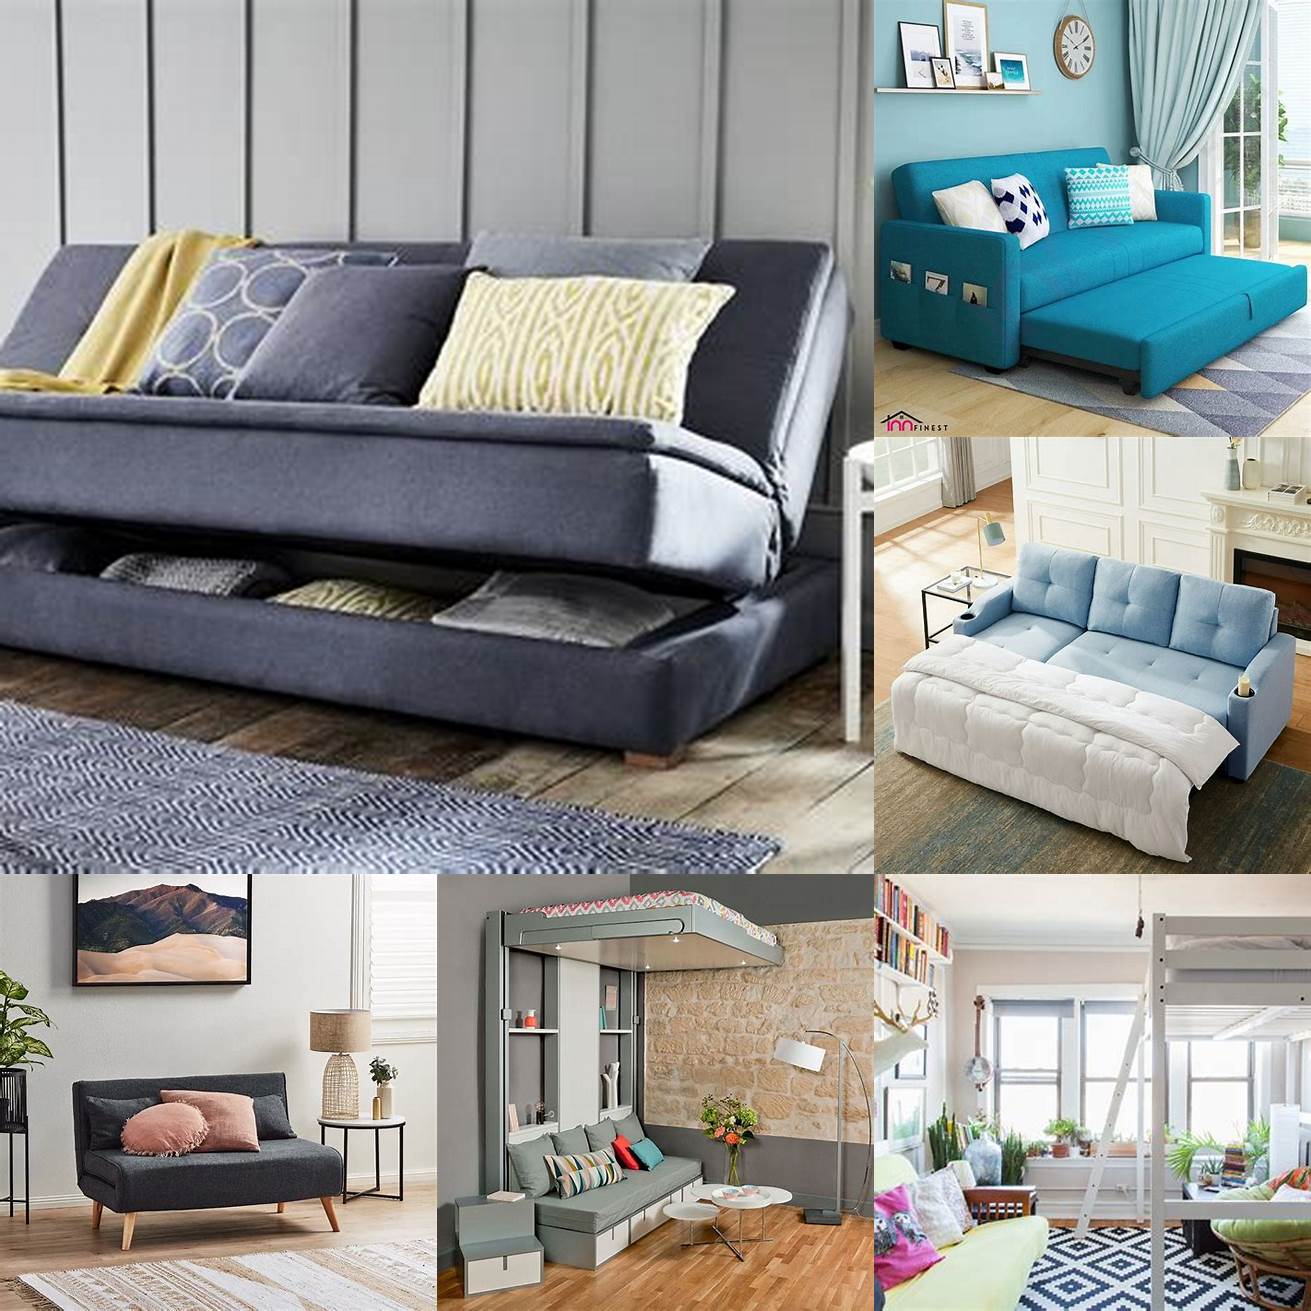 A sofa bed is a perfect space-saving solution for a small living room